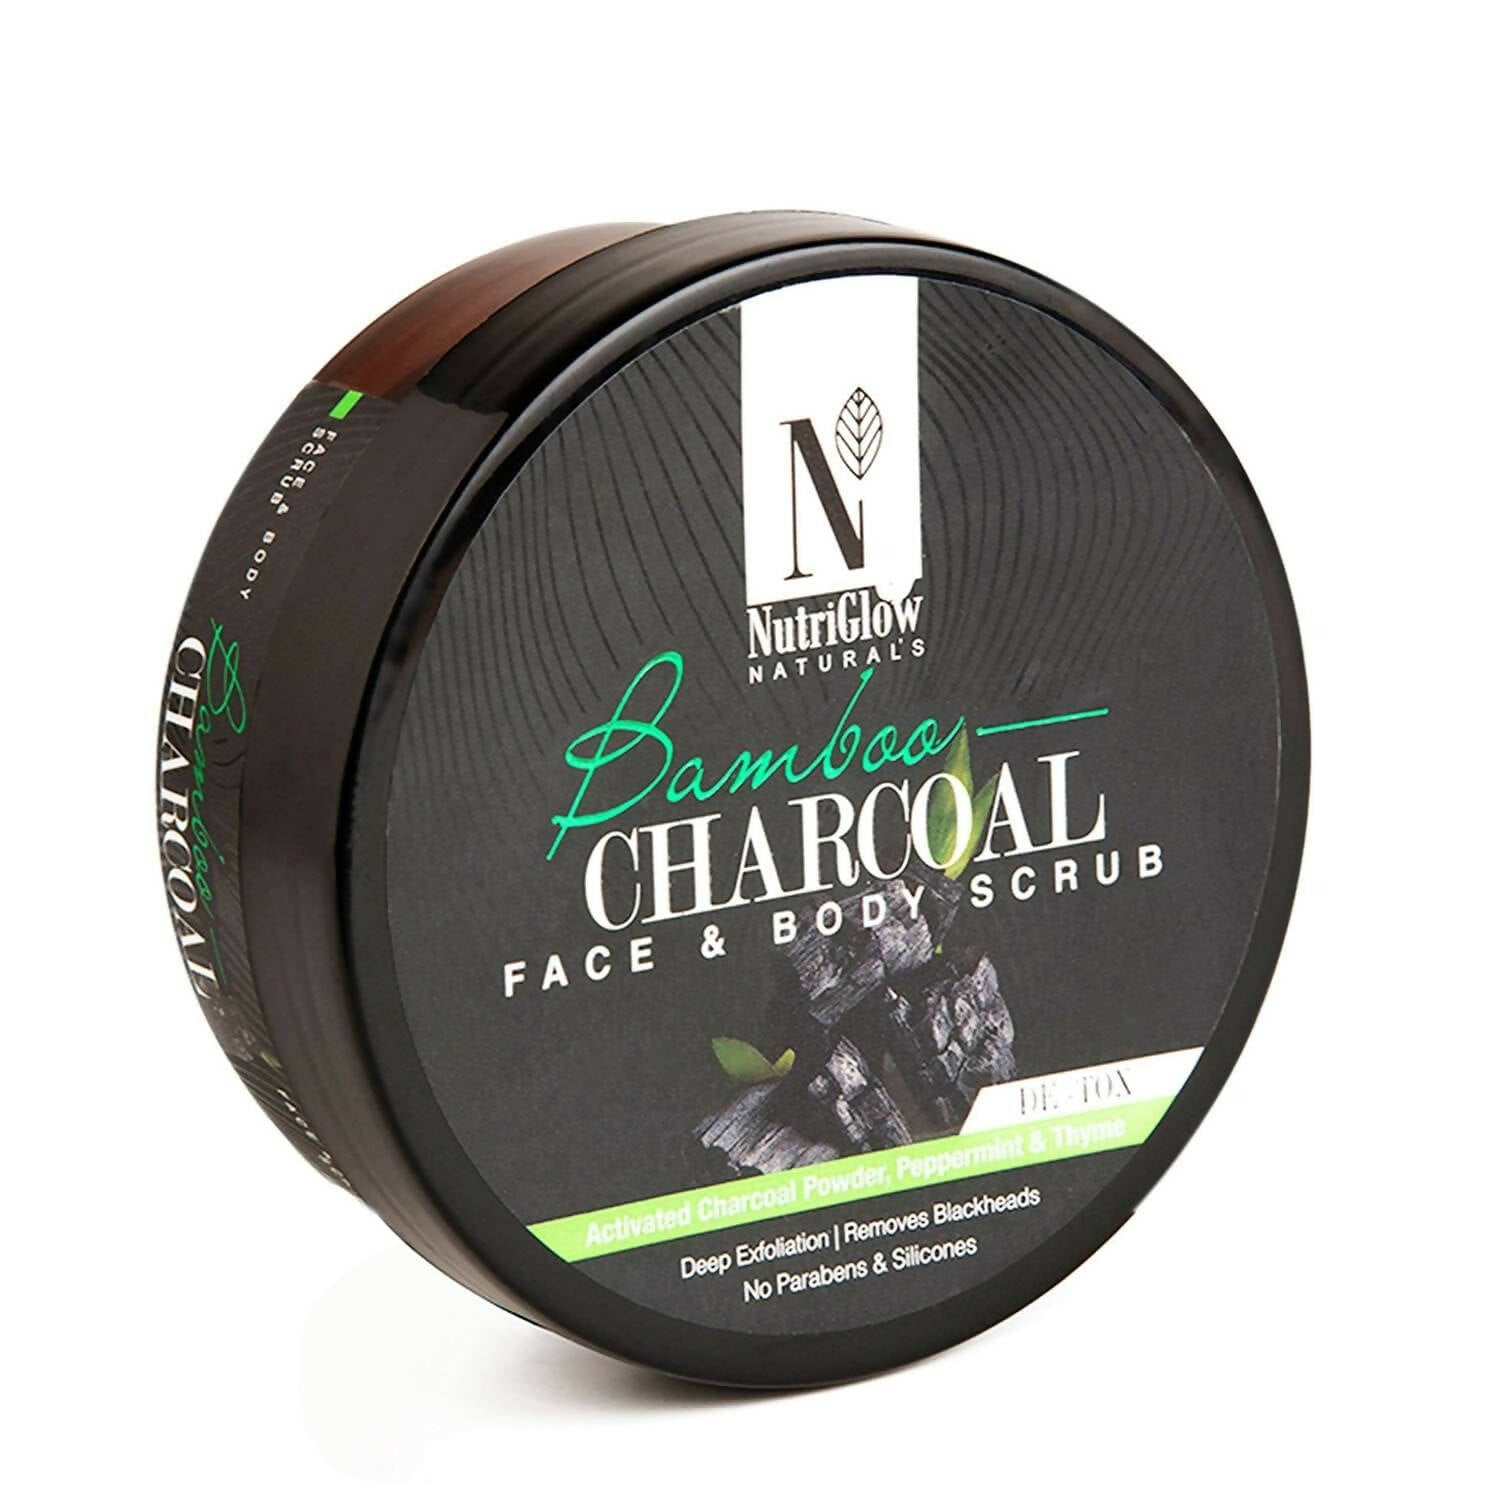 NutriGlow NATURAL'S Bamboo Charcoal Face & Body Scrub - BUDNEN